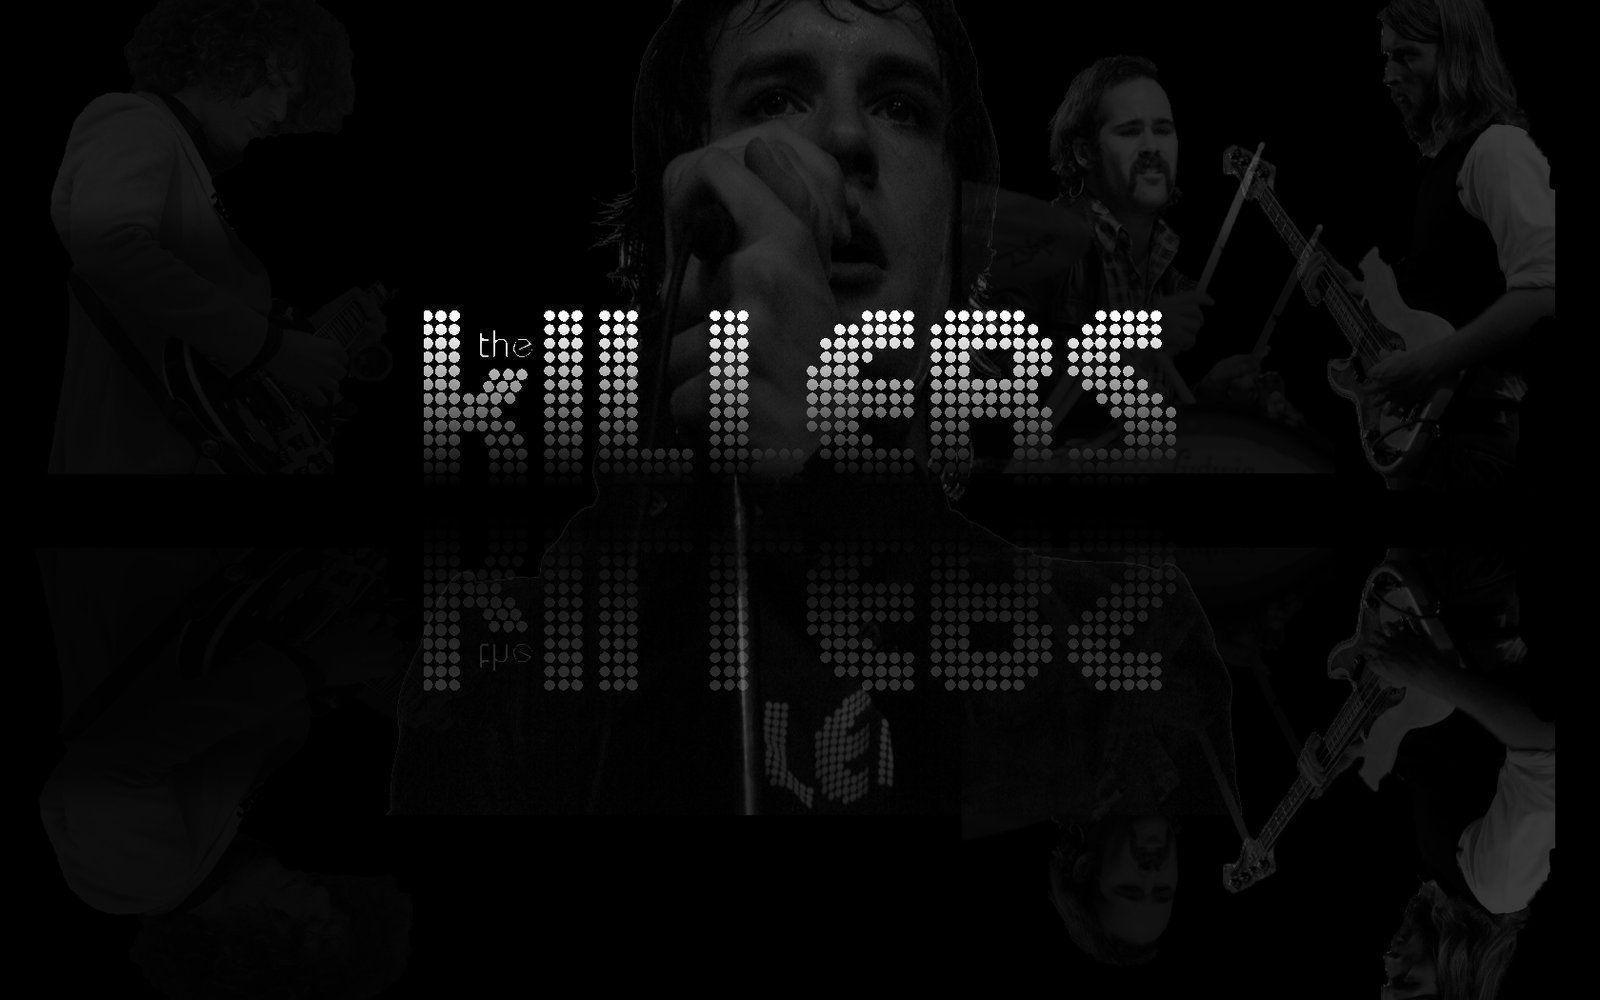 Gallery For > The Killers Wallpaper